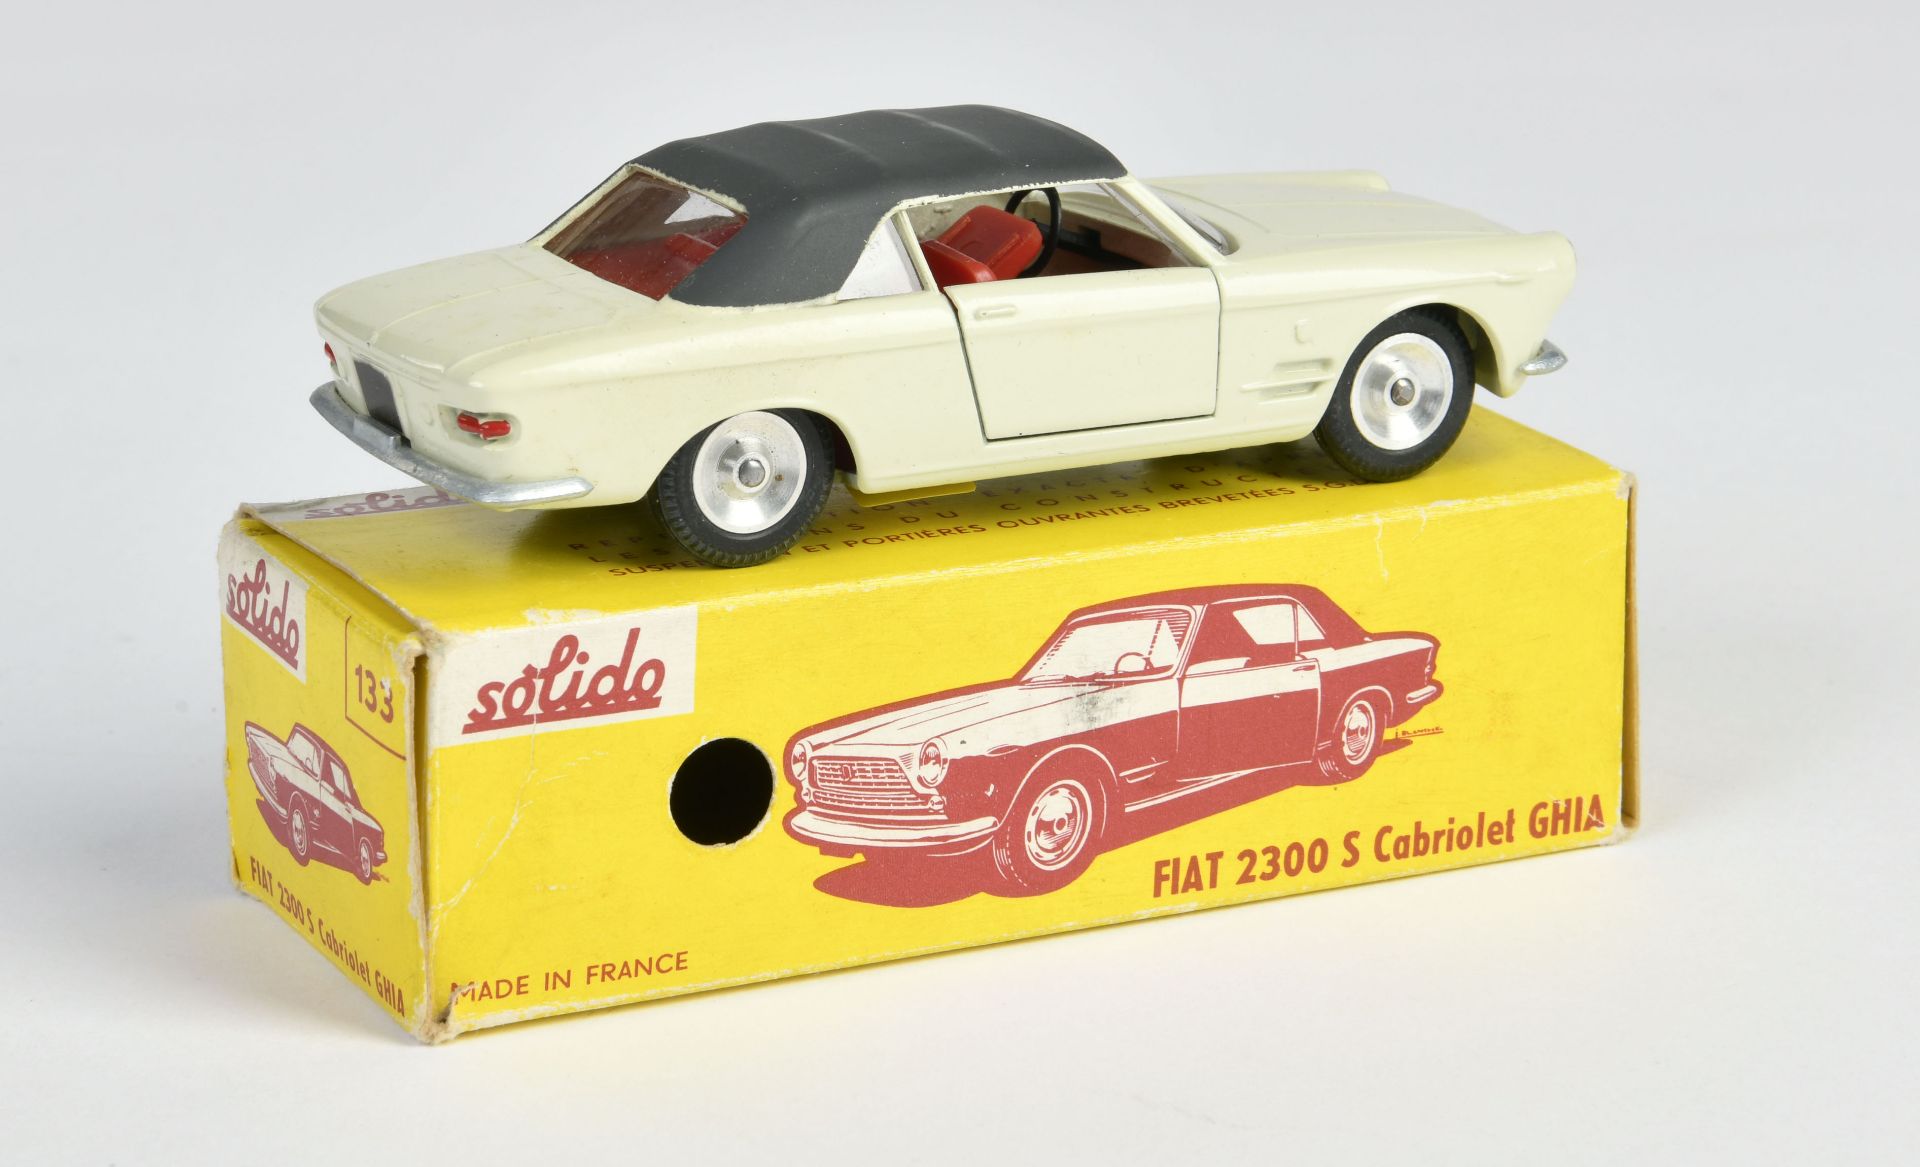 Solido, Fiat 2300 S Cabriolet Ghia, France, 1:43, box, C 1- - Image 2 of 2